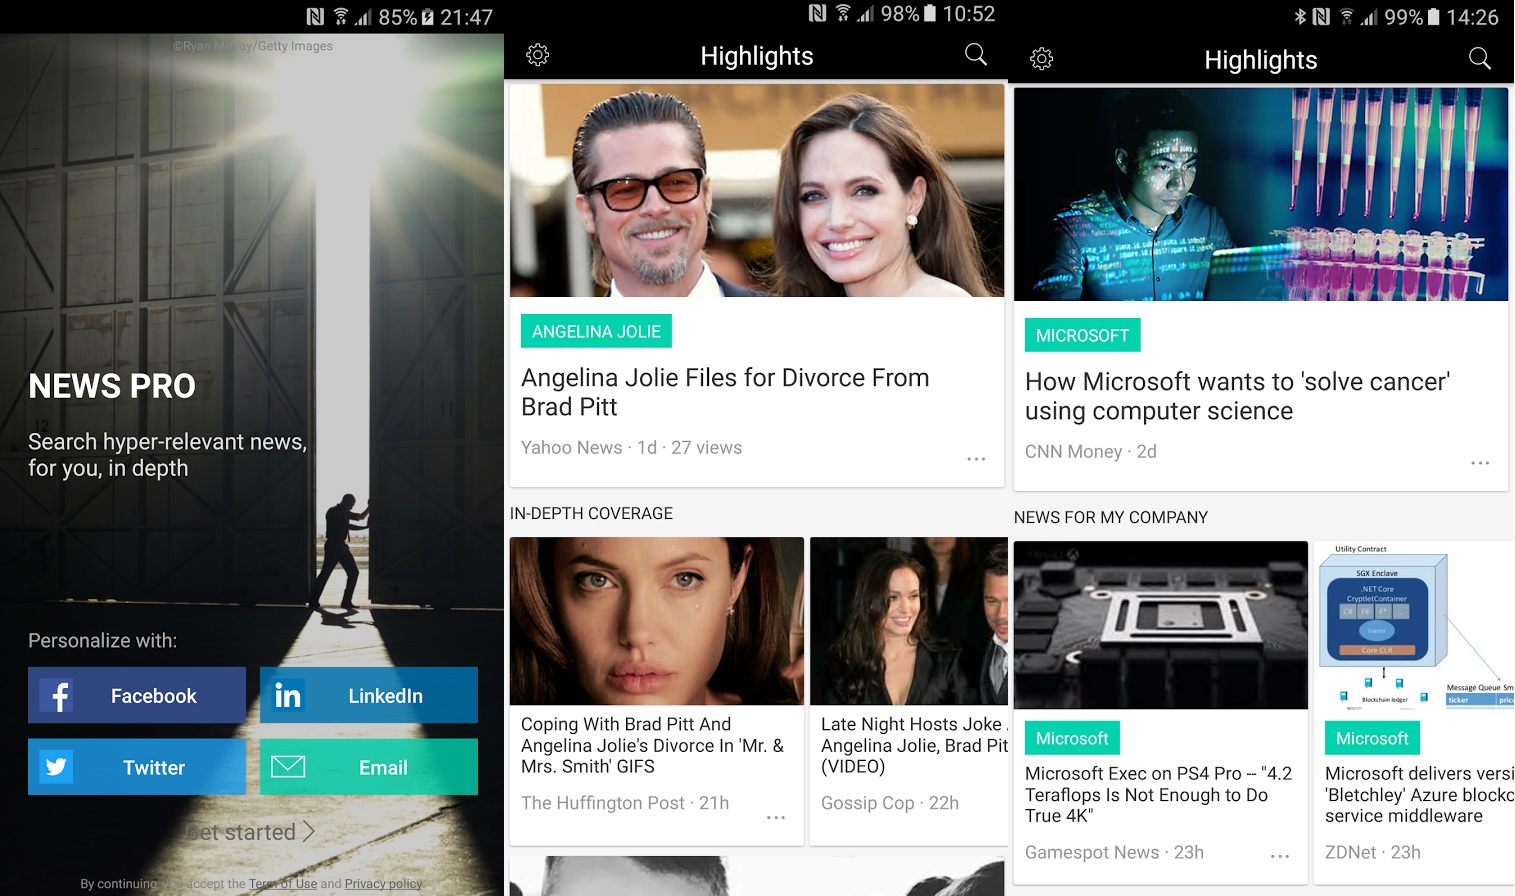 Microsoft Garage’s News Pro app now available on Android, iOS app gets News Pro bot and more